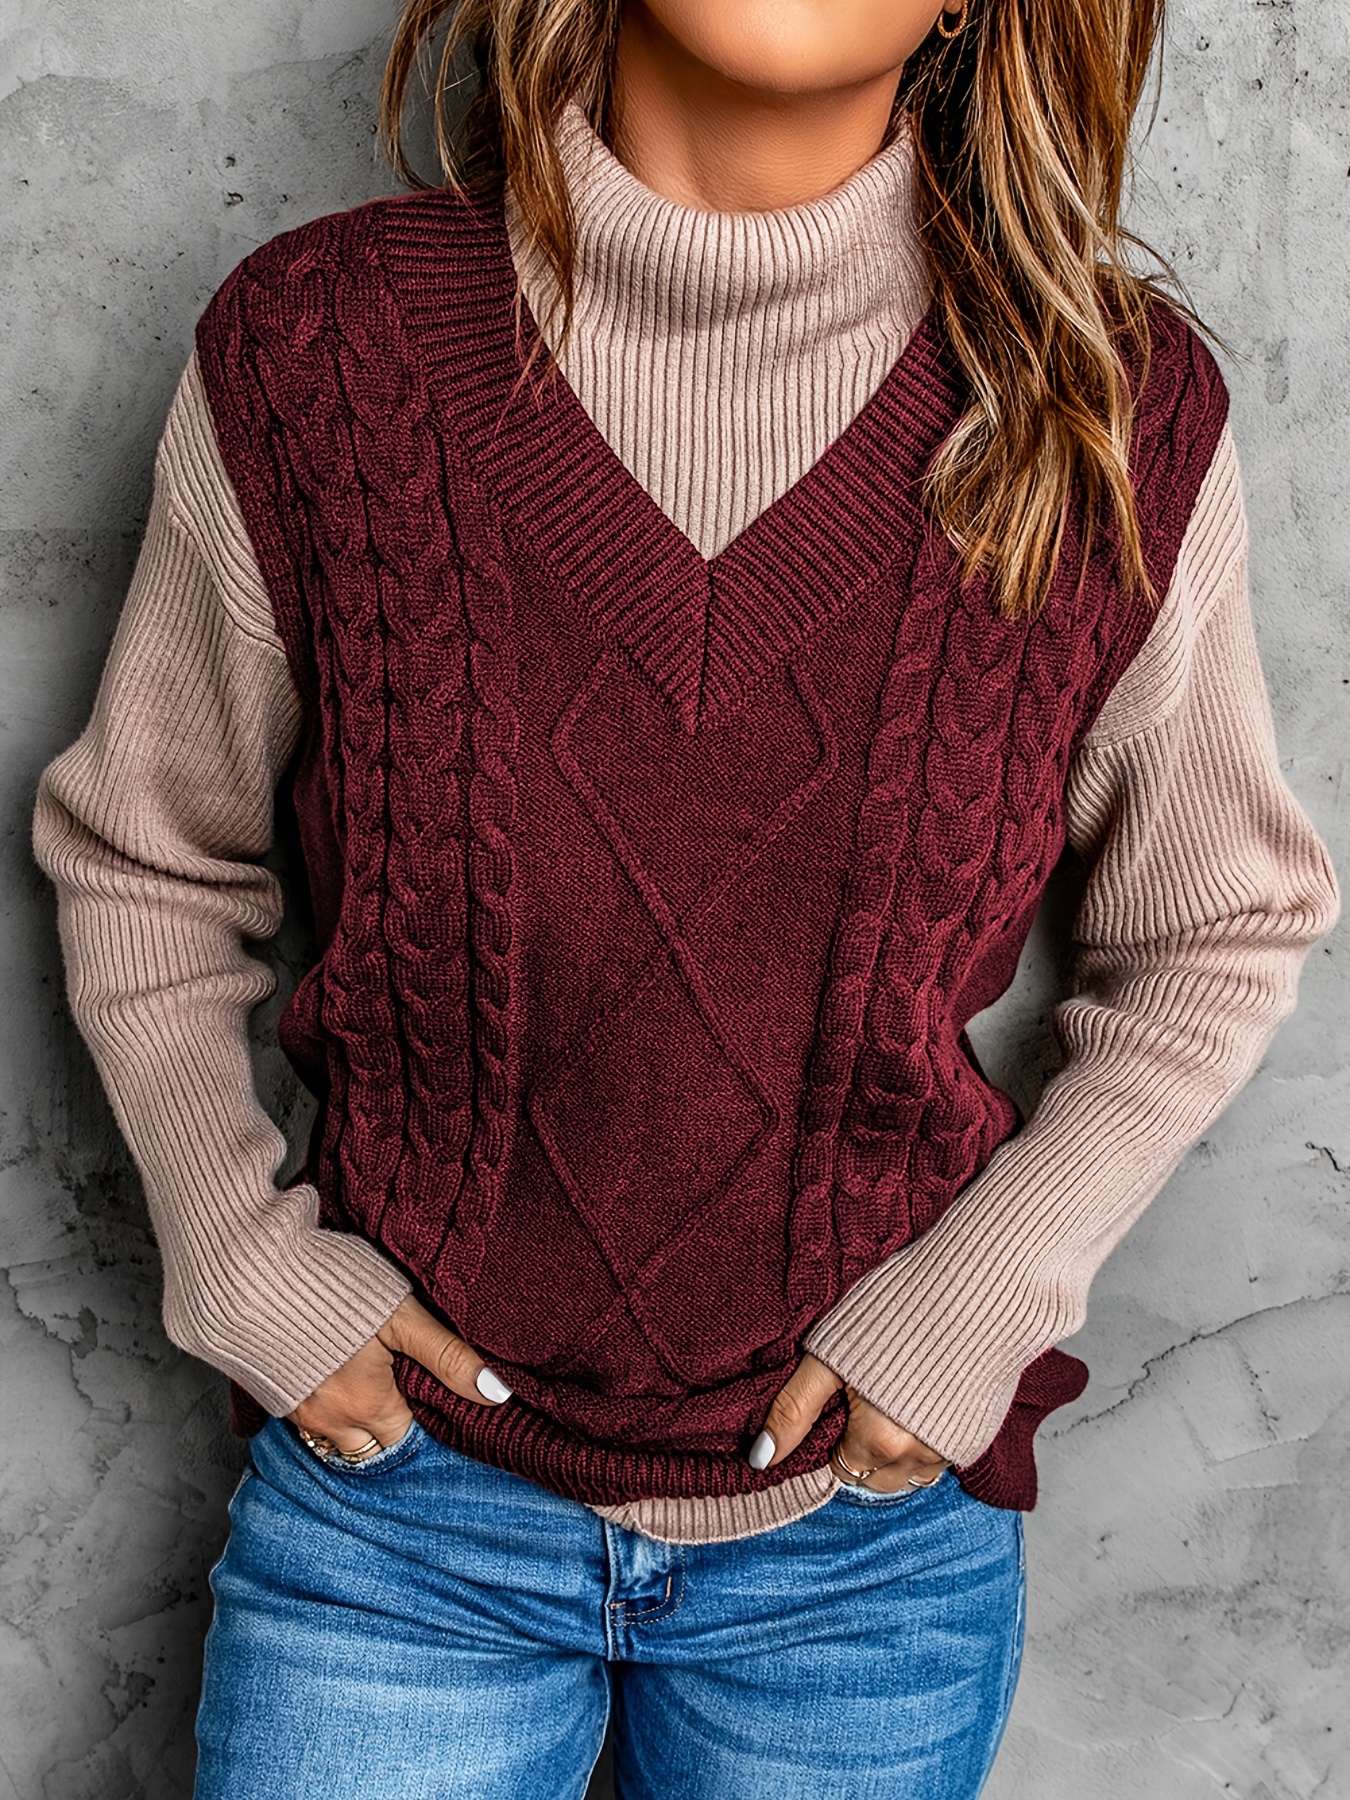 Women's Sweater Vest, Oversized Cable Knitted V Neck Loose Sleeveless  Sweater Top